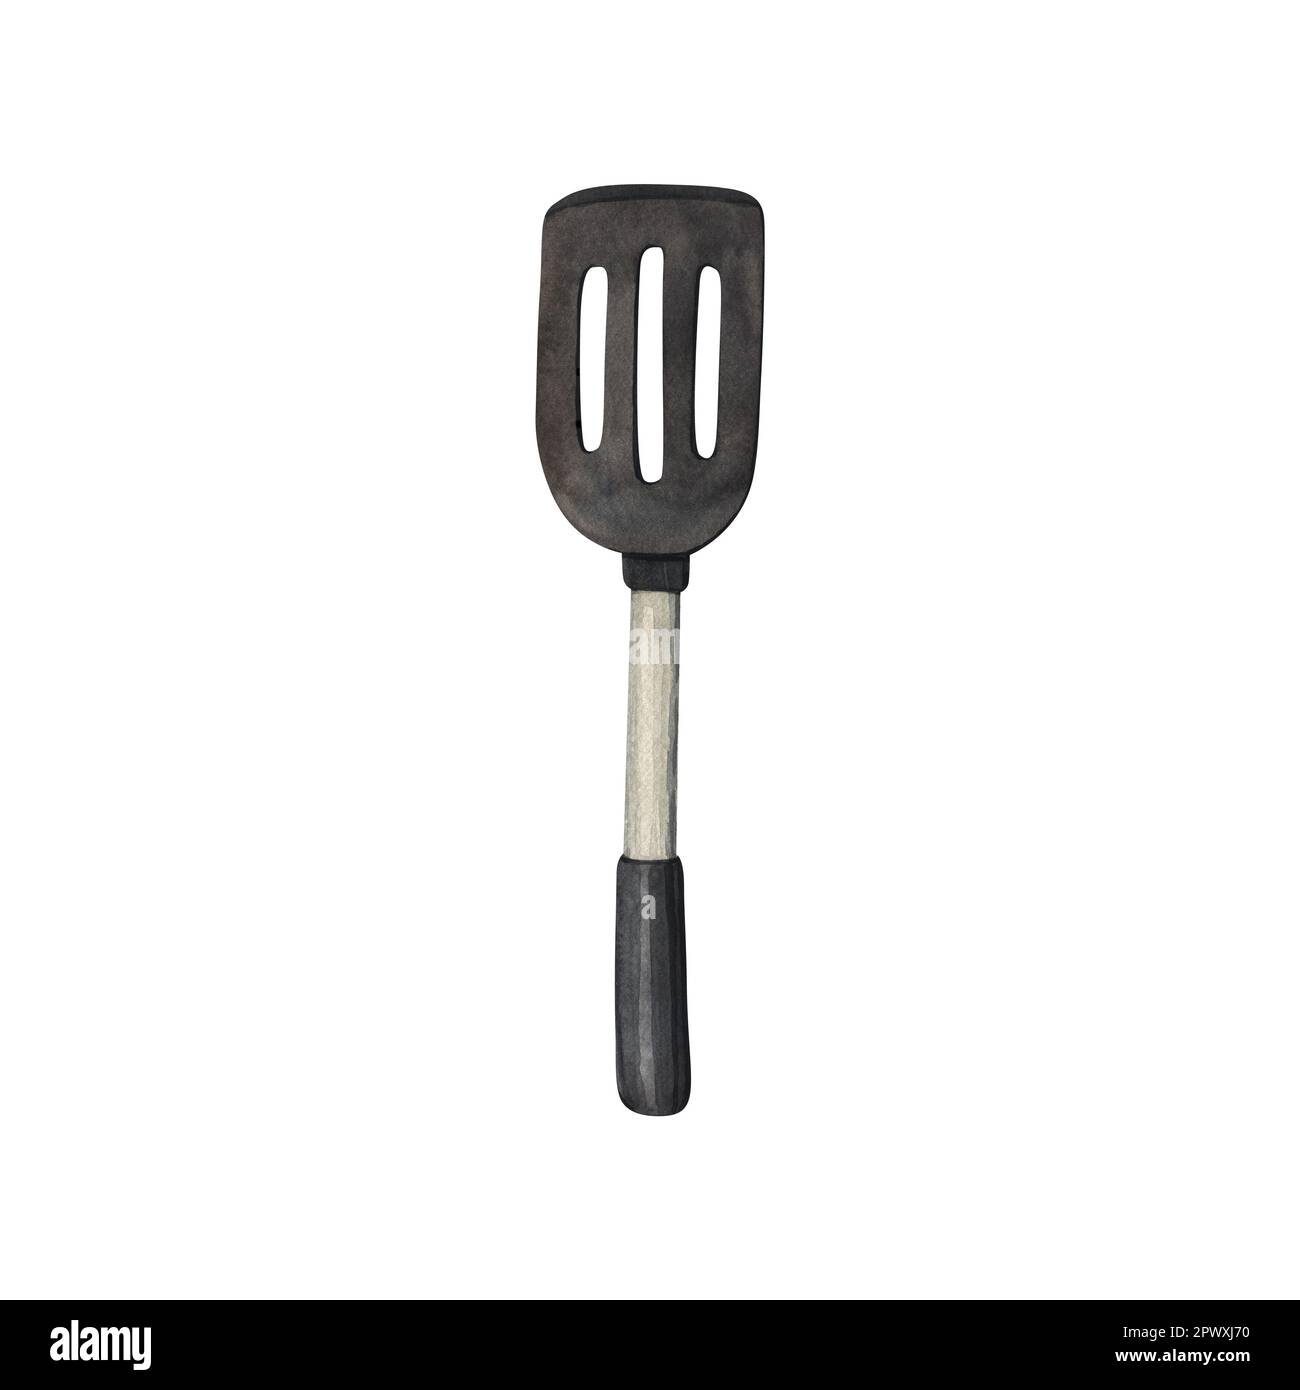 A black and white illustration of a rubber spatula Stock Photo - Alamy